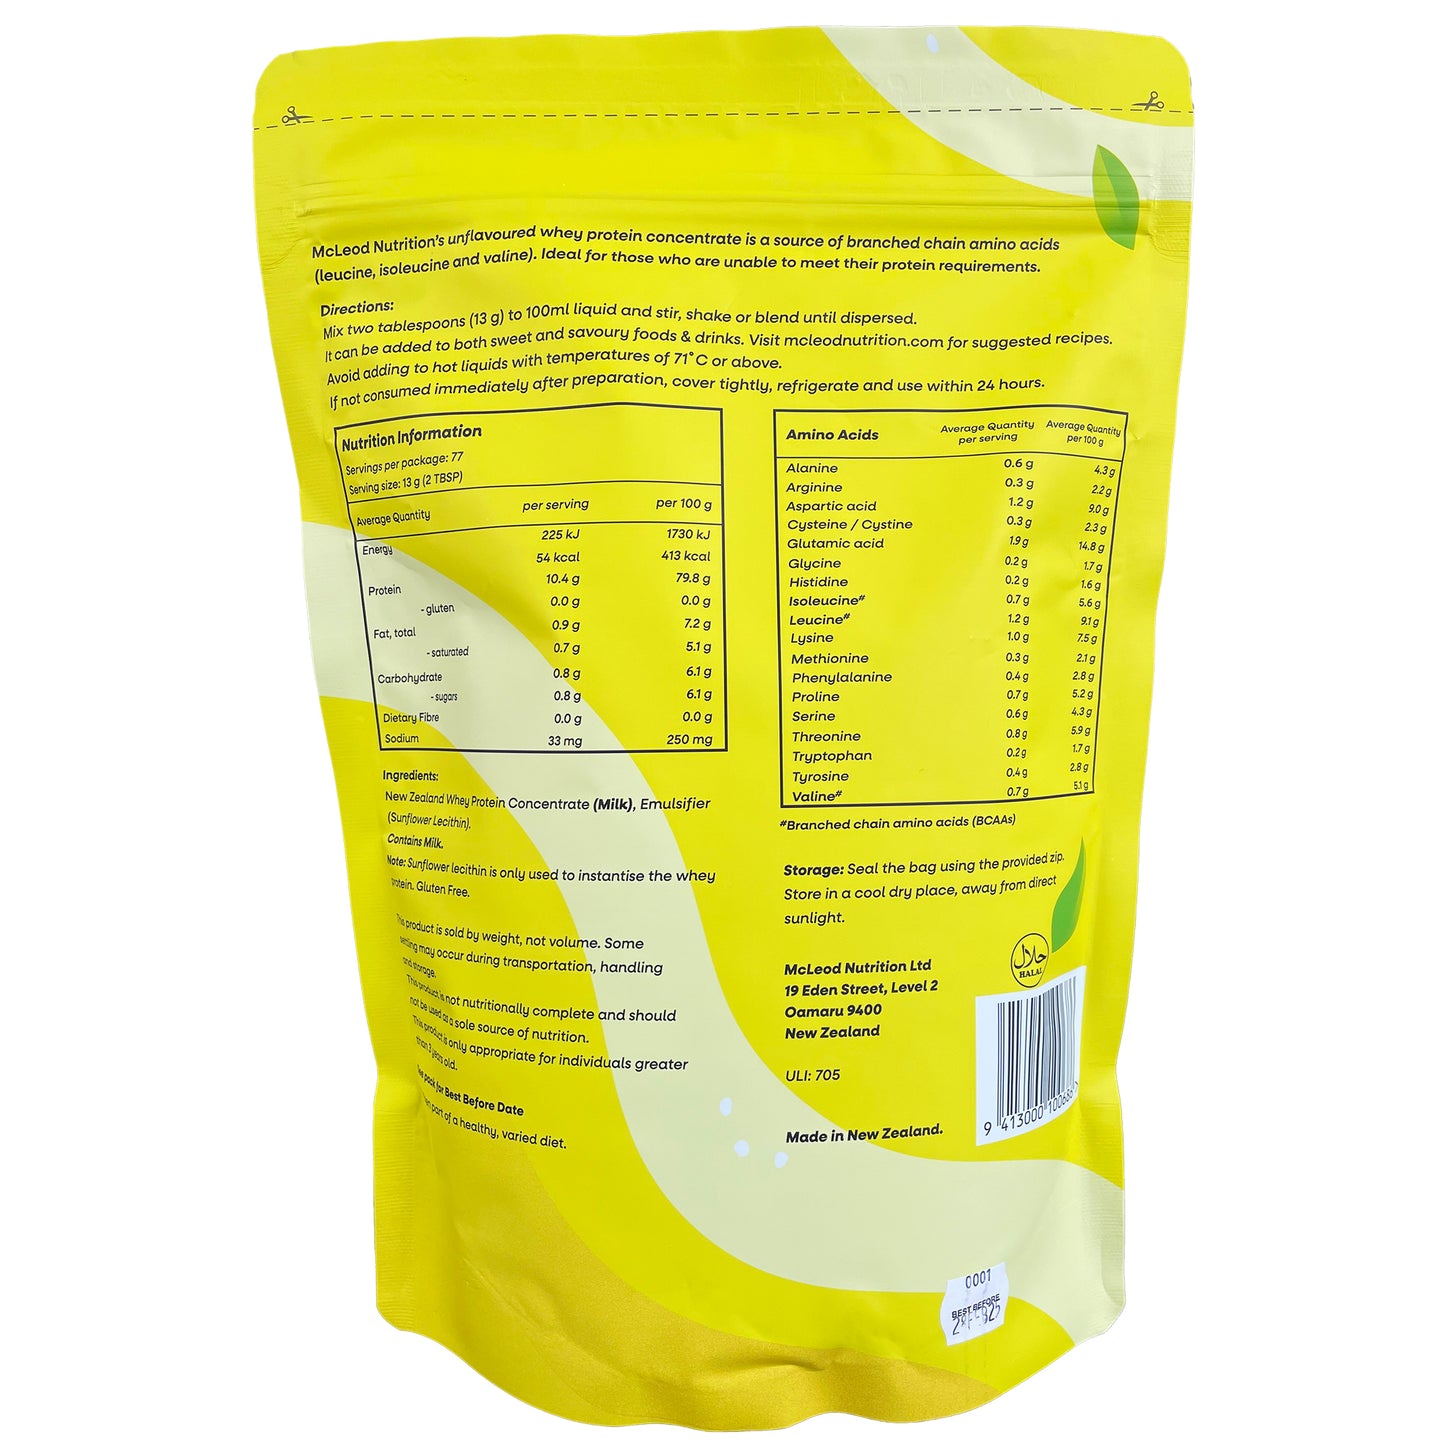 Unflavoured Whey Protein Concentrate 1kg